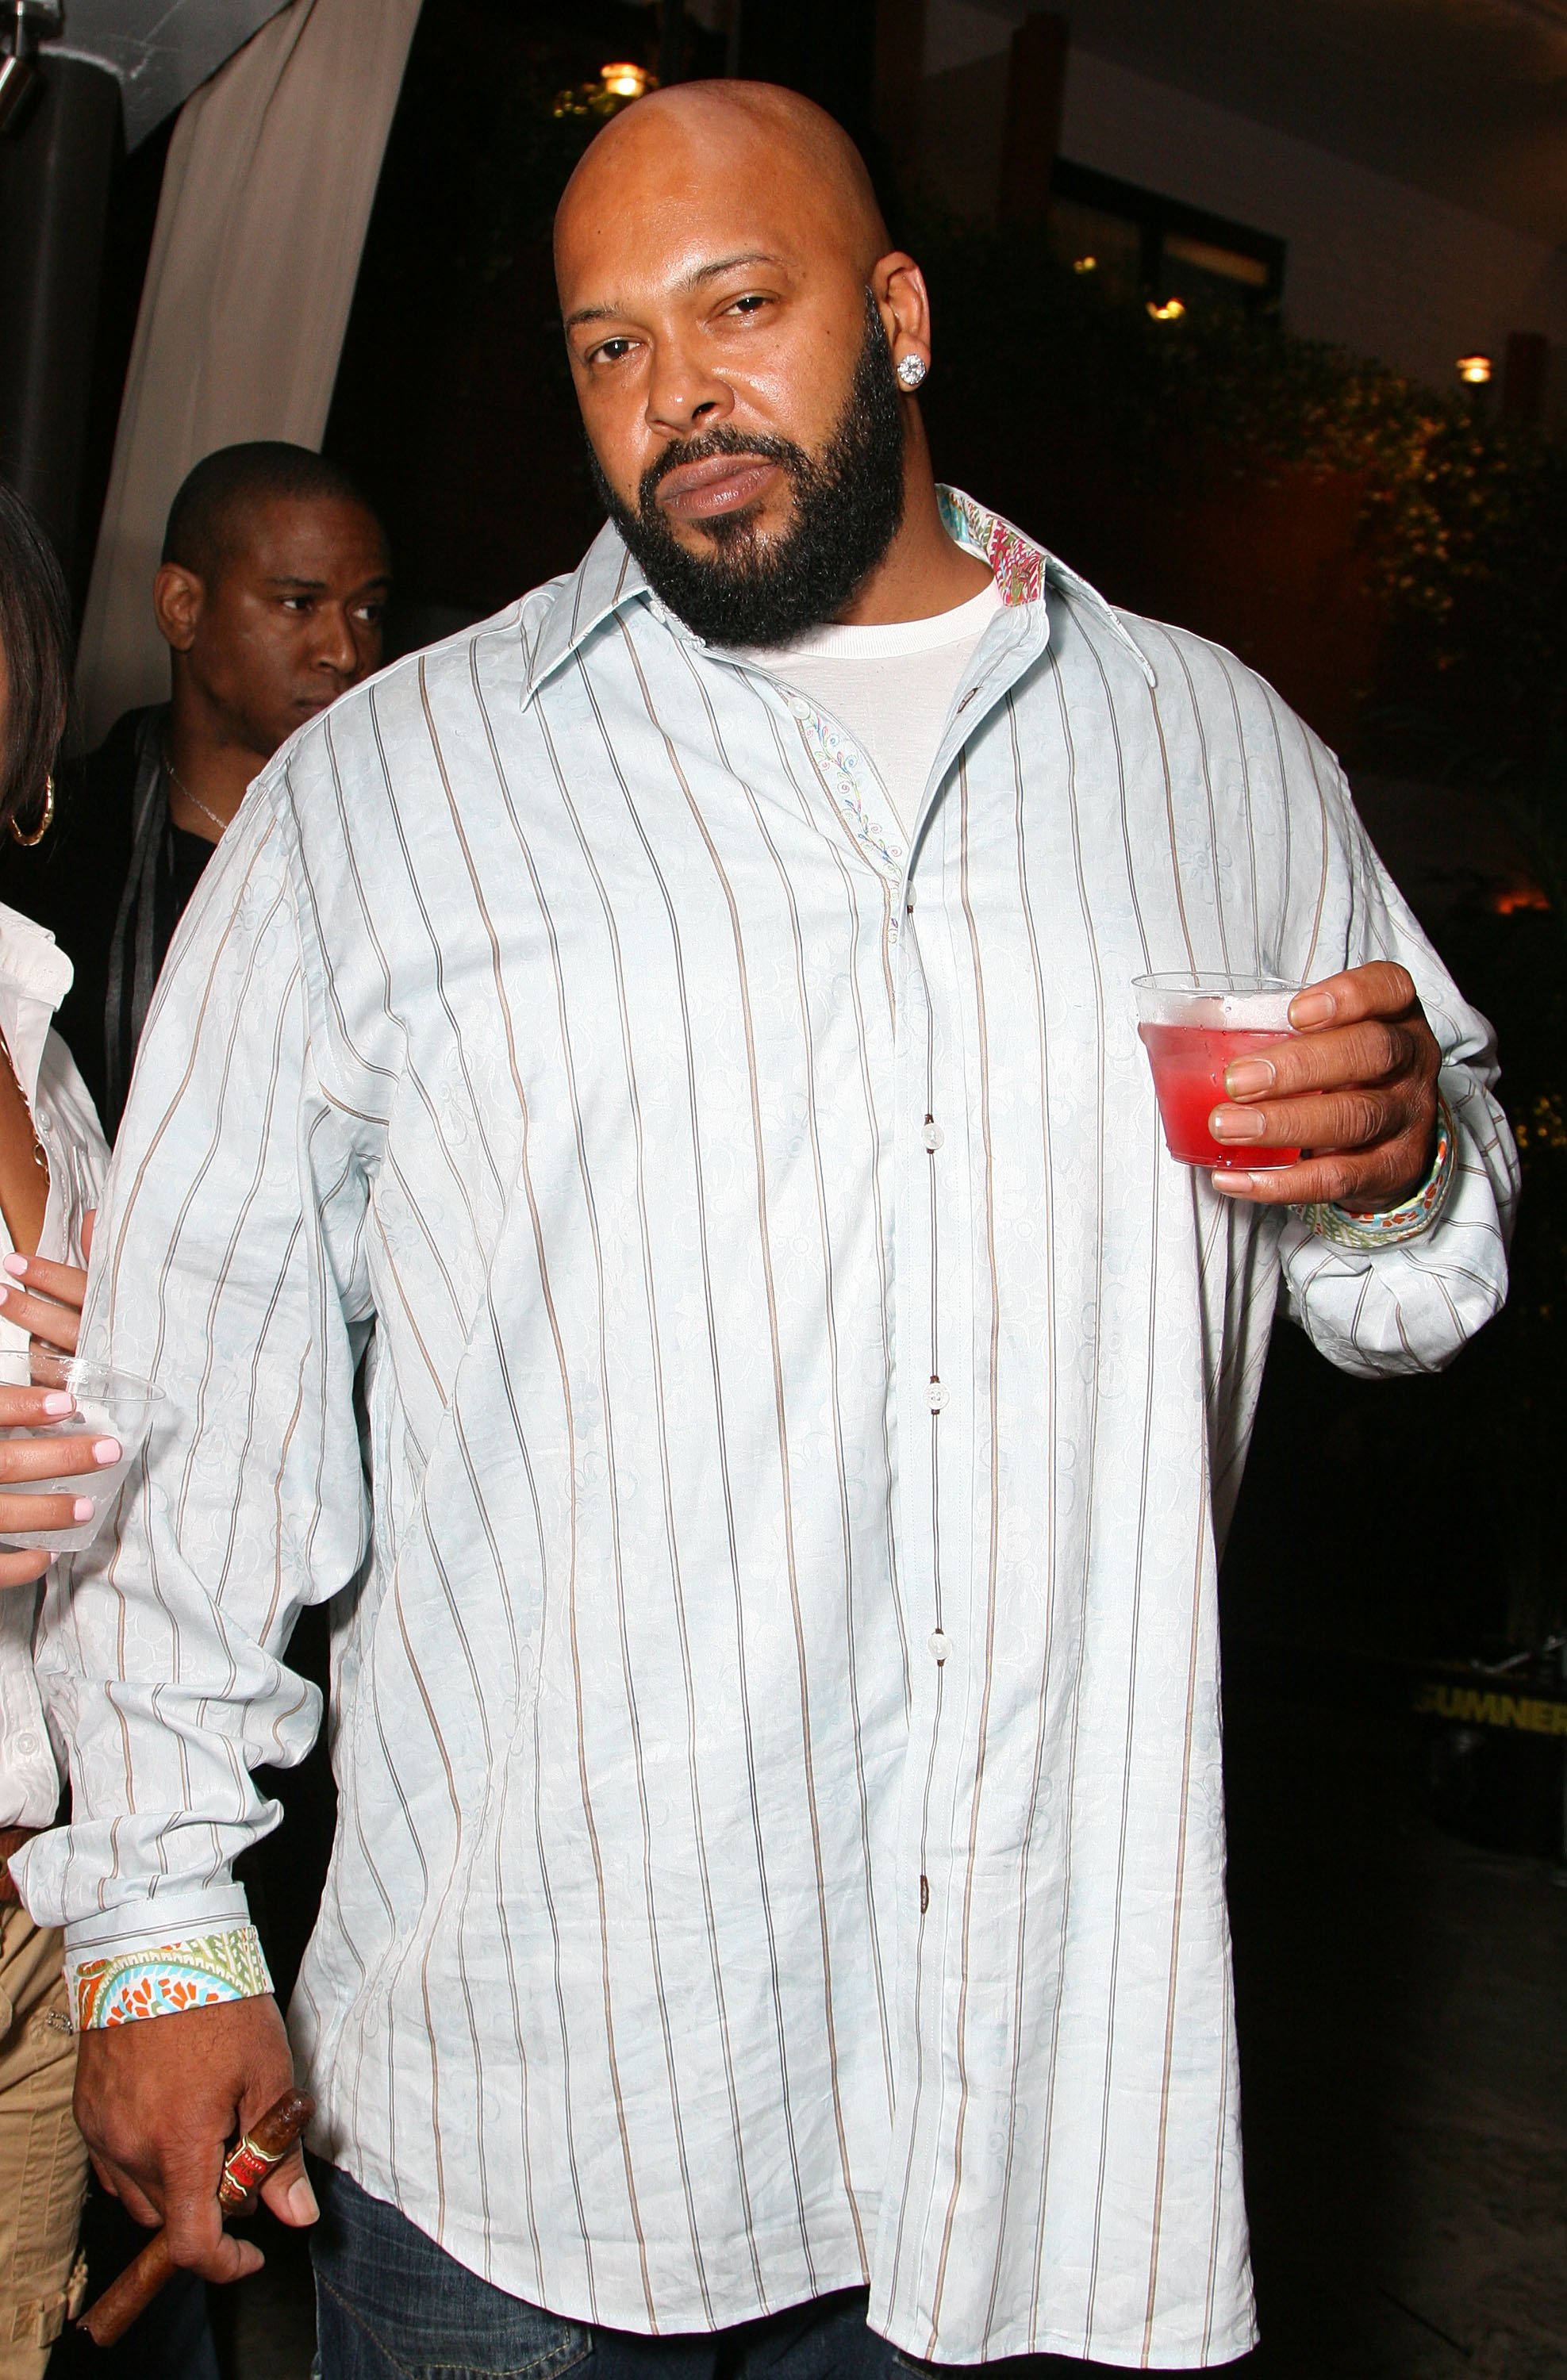 Suge Knight at then-CEO of Death Row Records attending the 2007 BET Awards after party in Hollywood. | Source: Getty Images